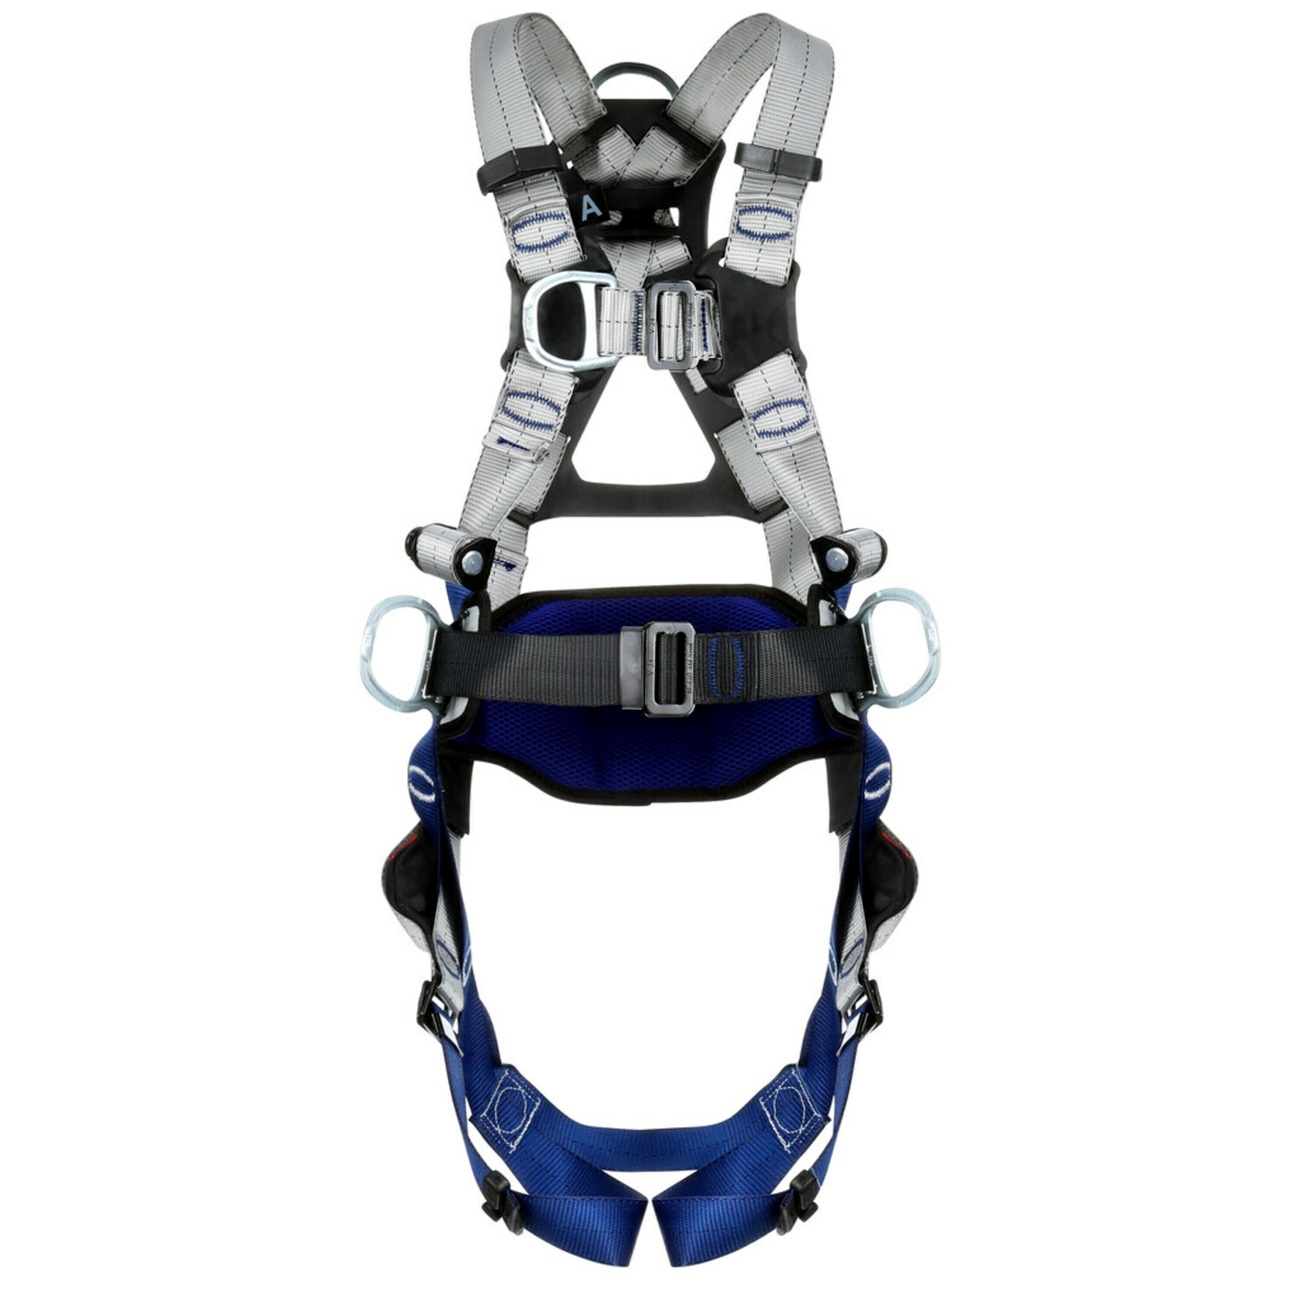 3M DBI-SALA ExoFit XE50 4-point harness with safety harness 1112716, automatic buckles, size 3